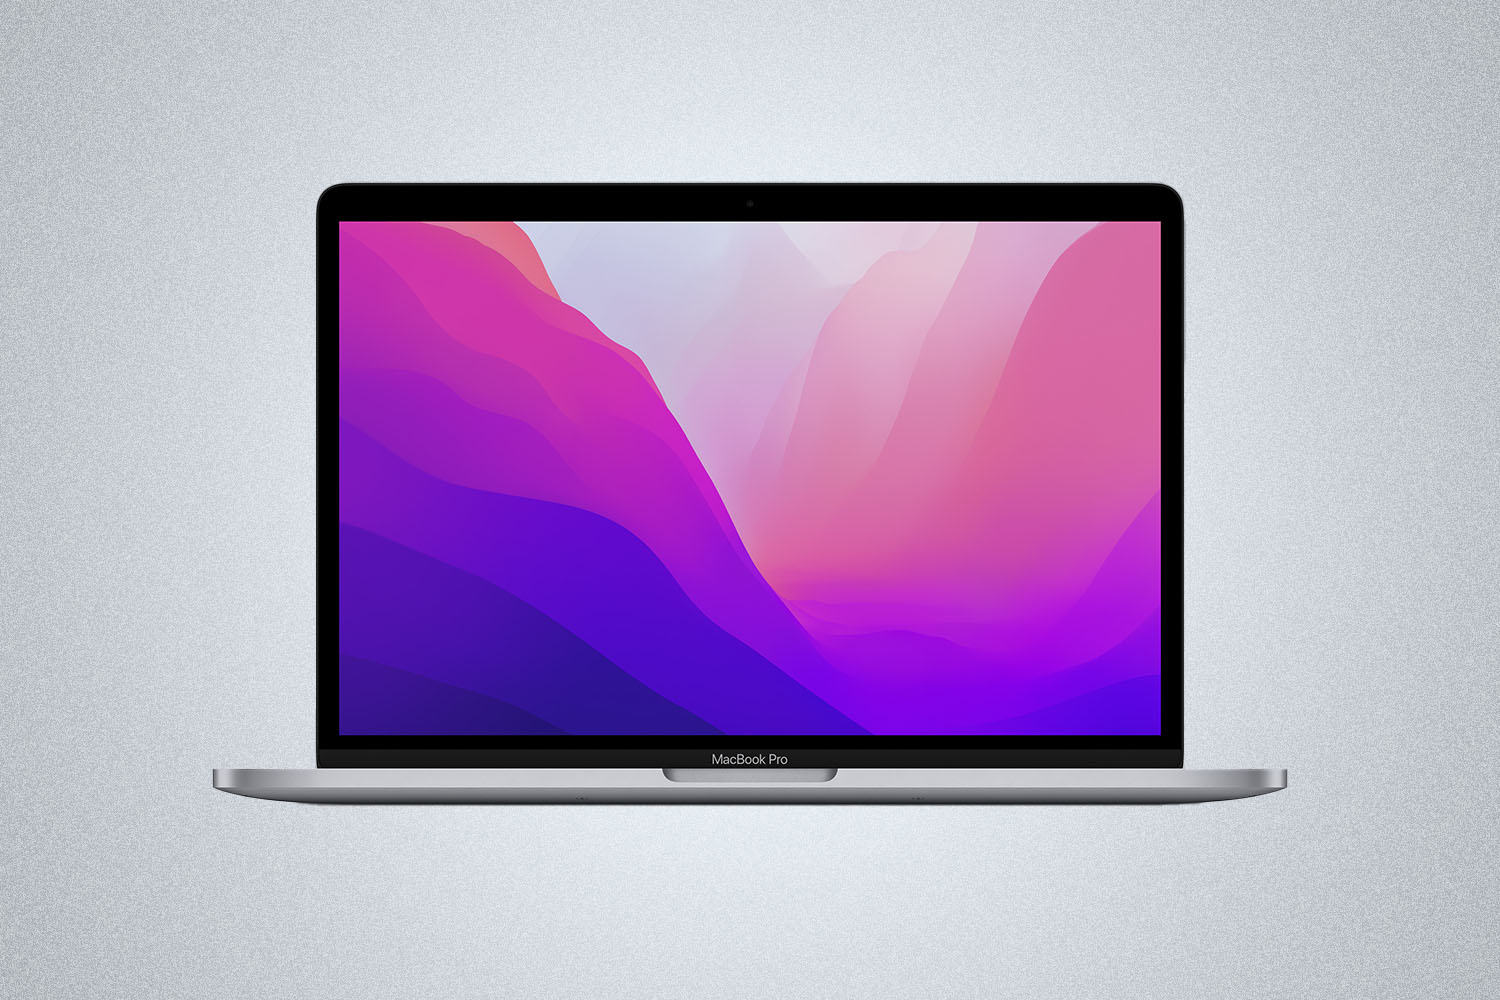 the new M2 Apple MacBook Pro 13" on a grey background